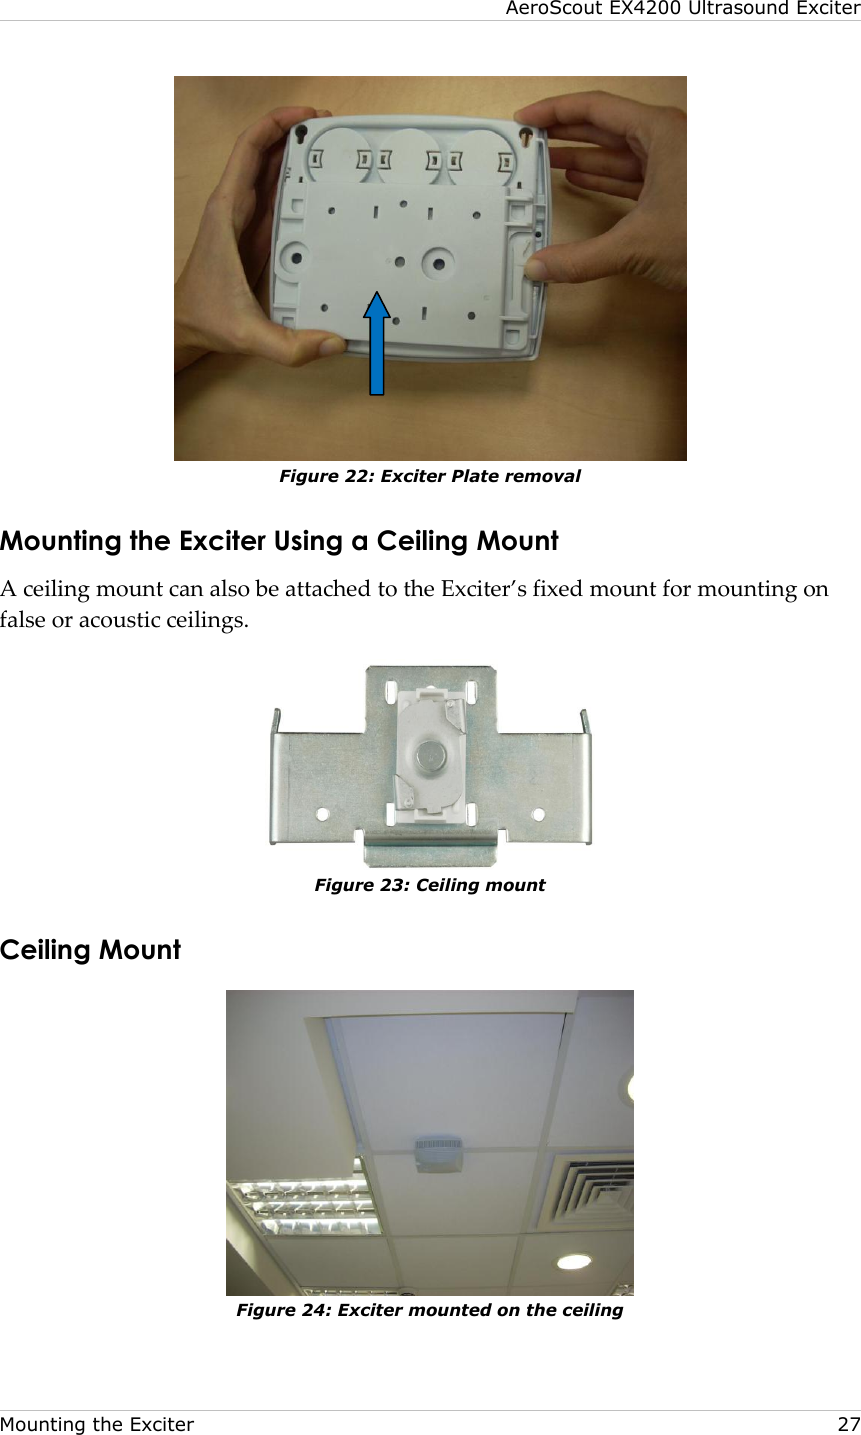 AeroScout EX4200 Ultrasound Exciter  Mounting the Exciter    27  Figure 22: Exciter Plate removal Mounting the Exciter Using a Ceiling Mount A ceiling mount can also be attached to the Exciter’s fixed mount for mounting on false or acoustic ceilings.    Figure 23: Ceiling mount Ceiling Mount  Figure 24: Exciter mounted on the ceiling 